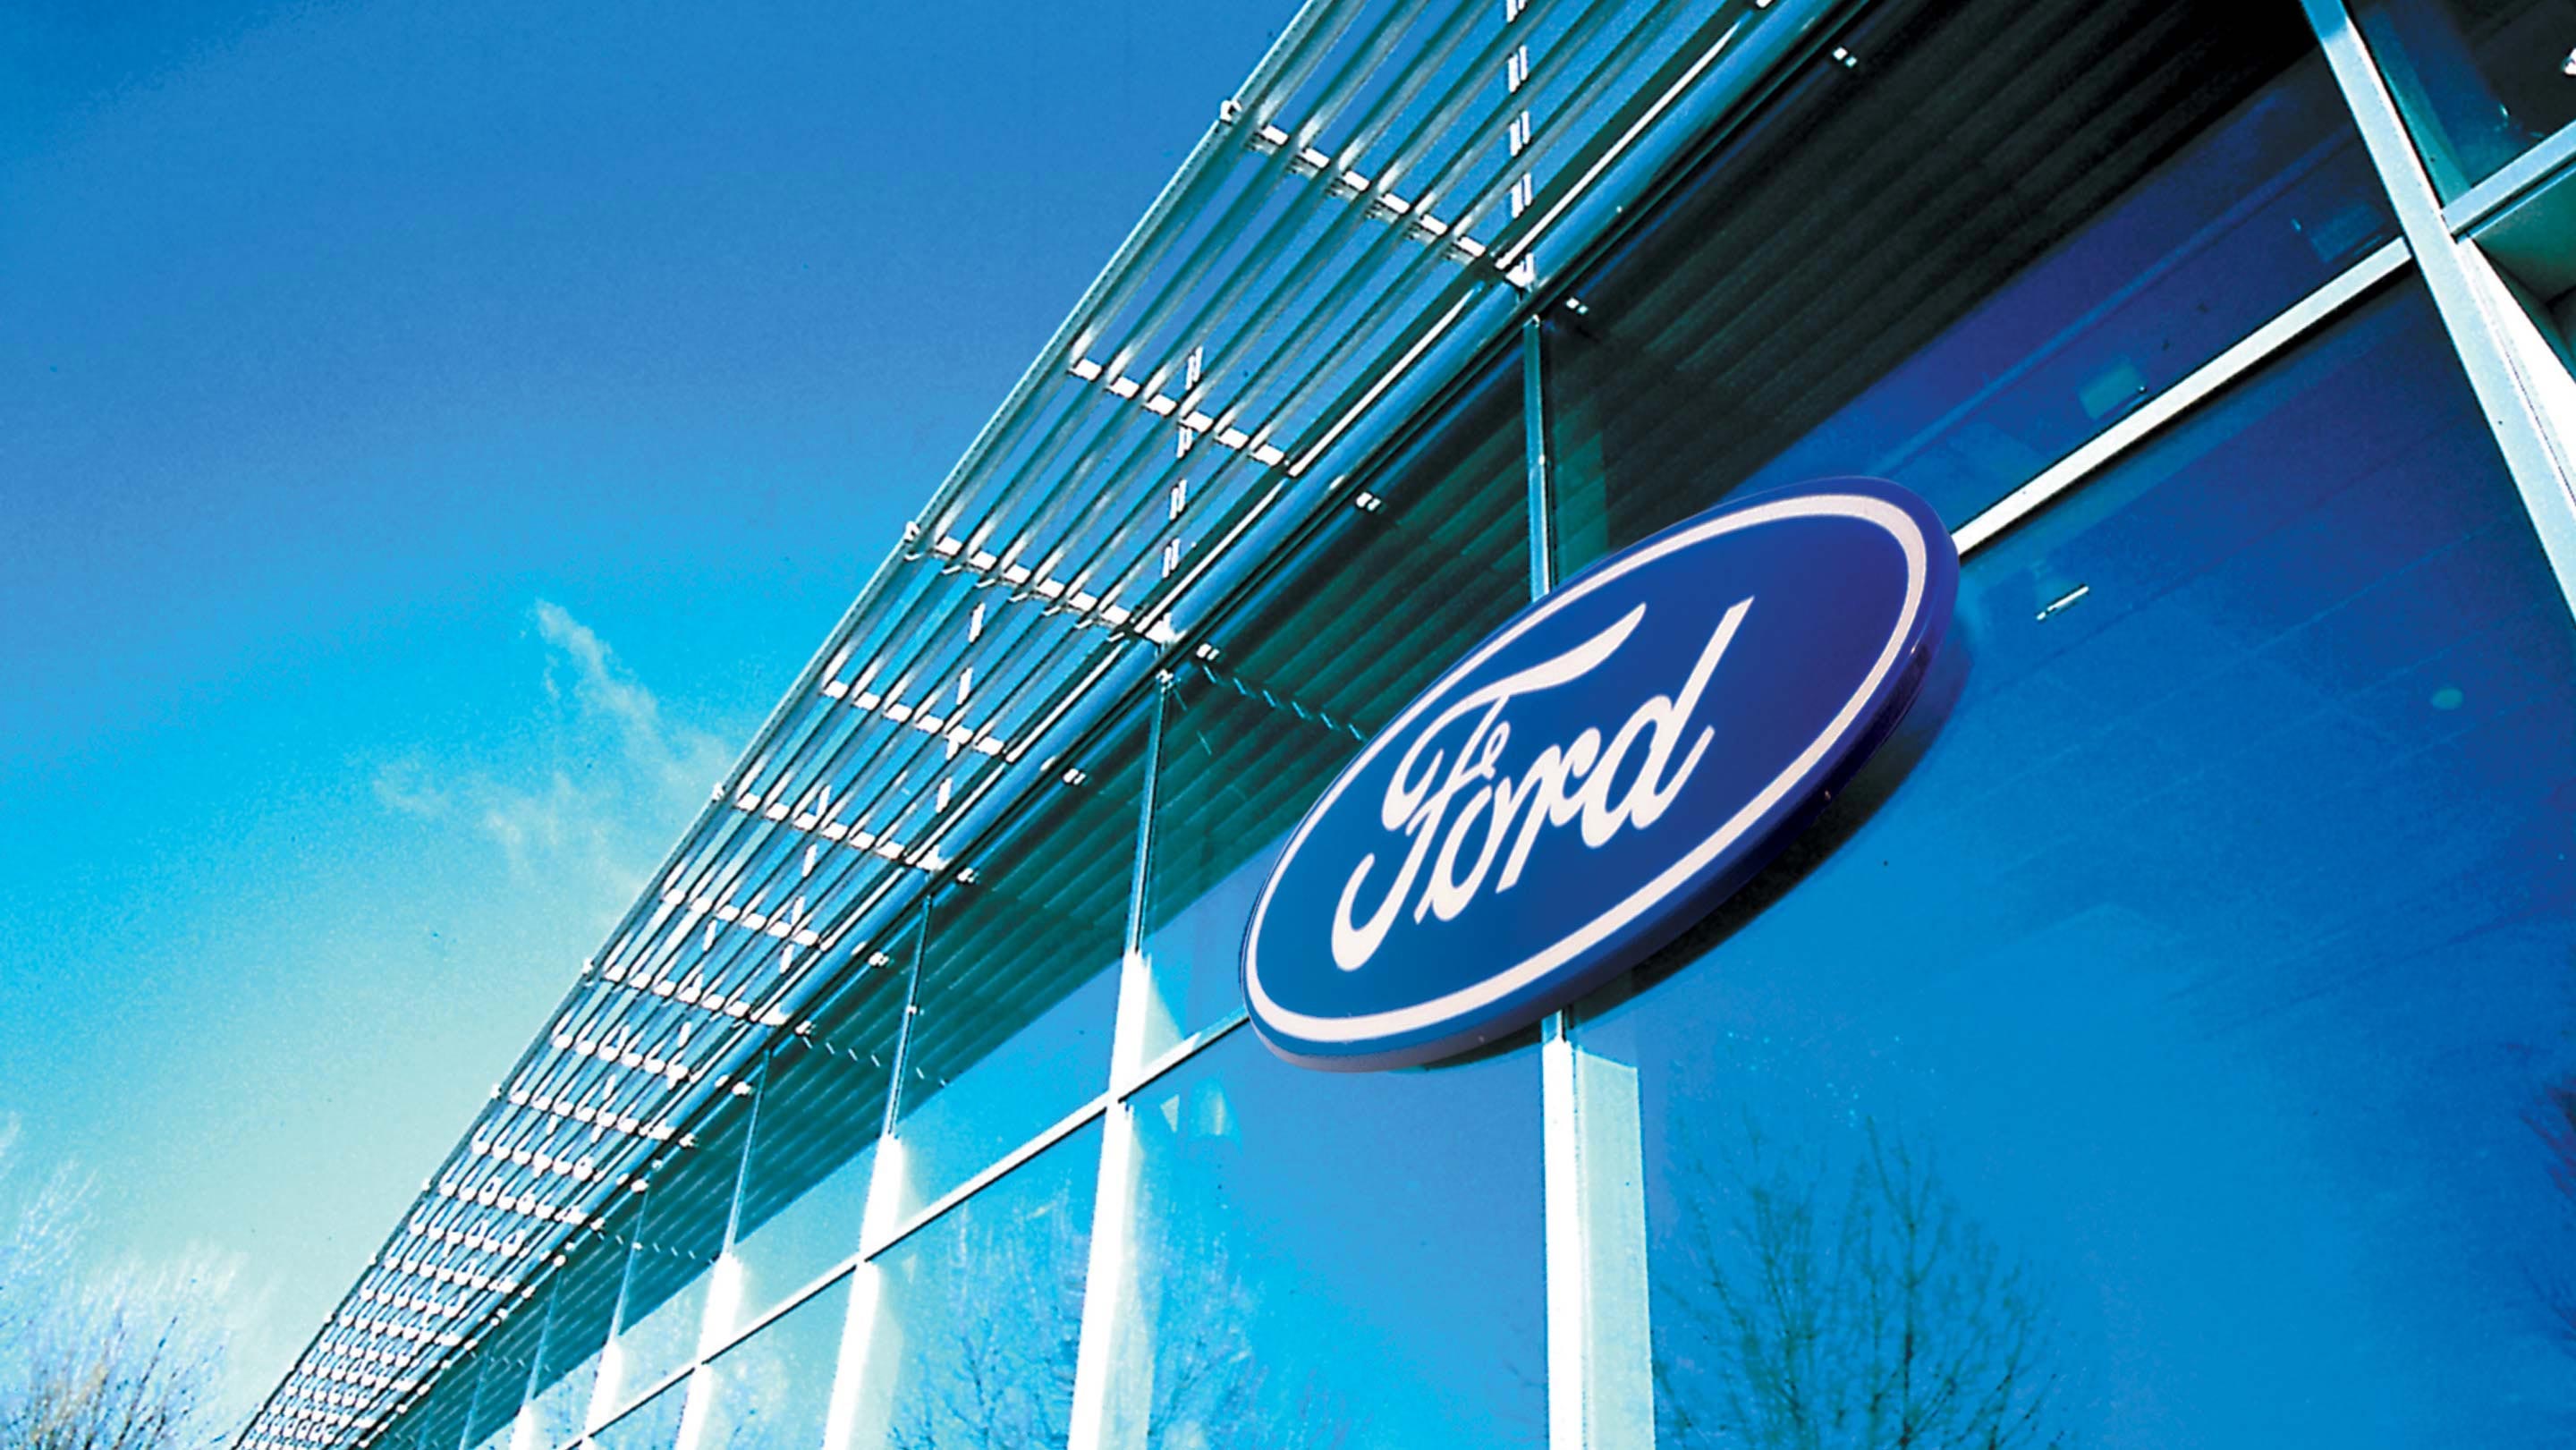 Ford logo on blue building